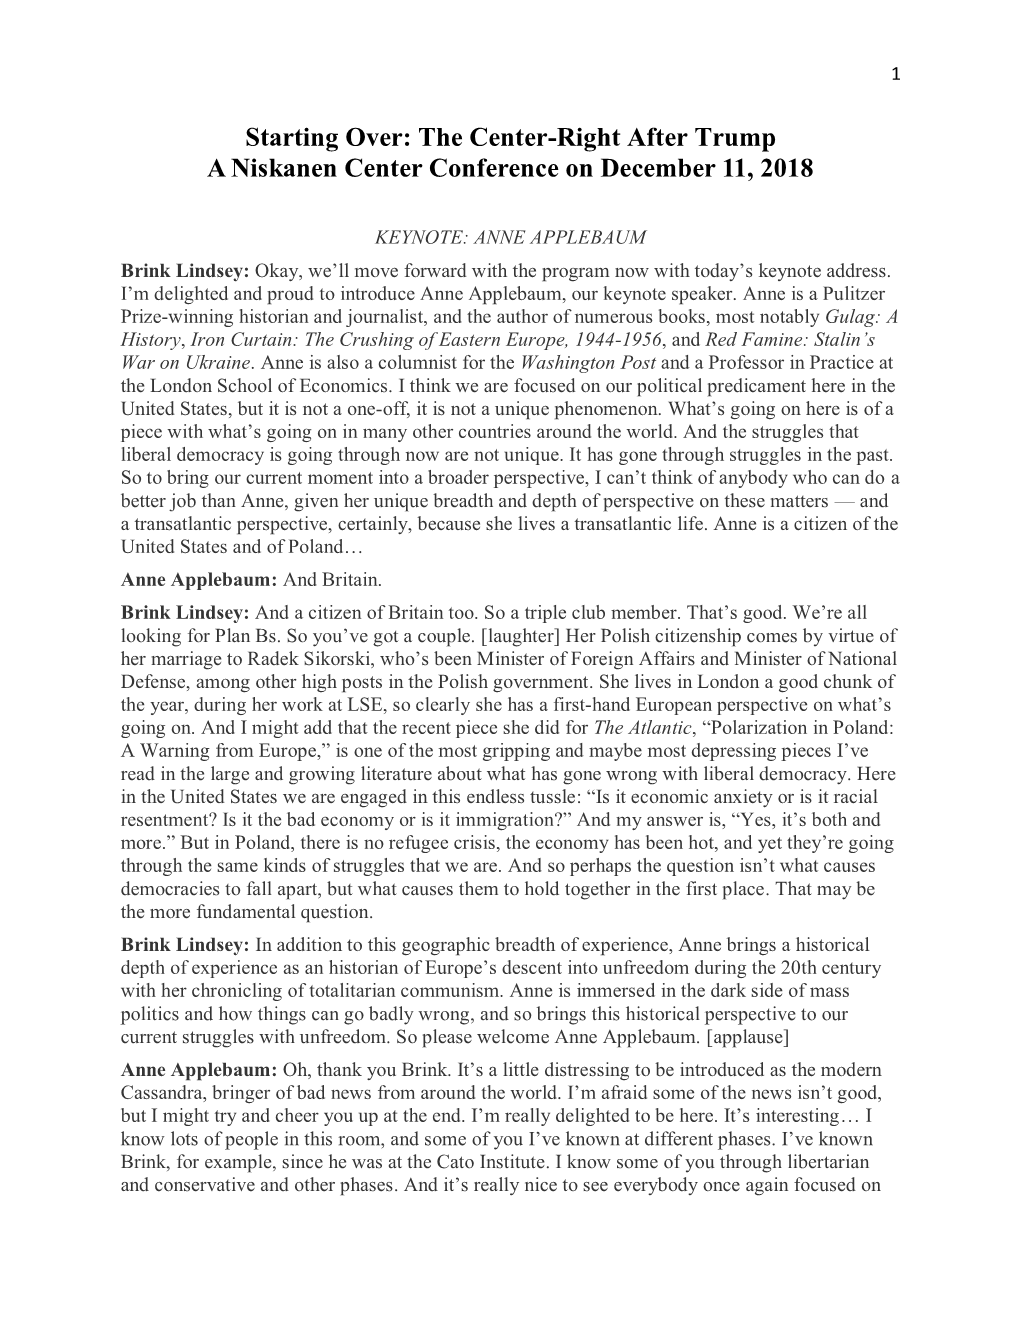 Starting Over: the Center-Right After Trump a Niskanen Center Conference on December 11, 2018